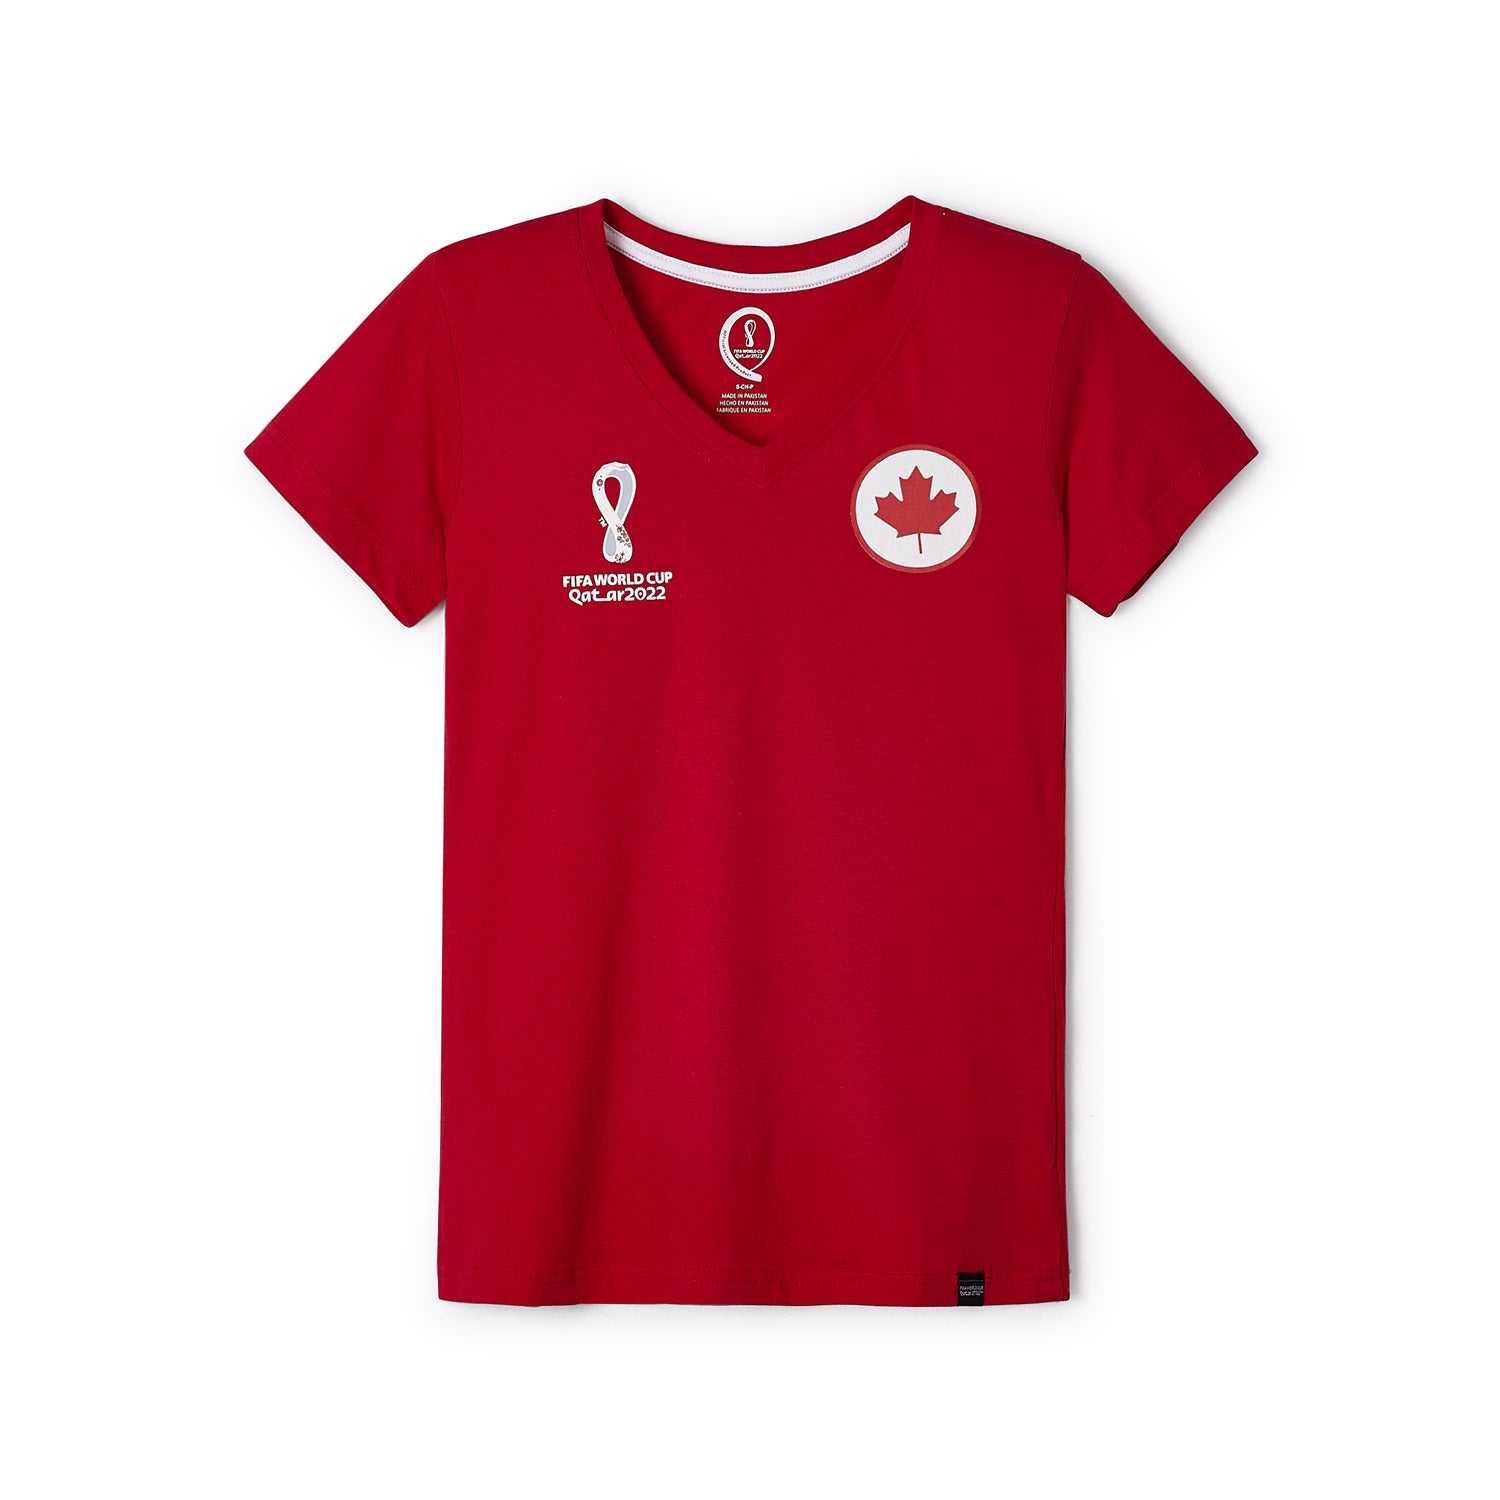 2022 World Cup Canada Red T-Shirt - Women's